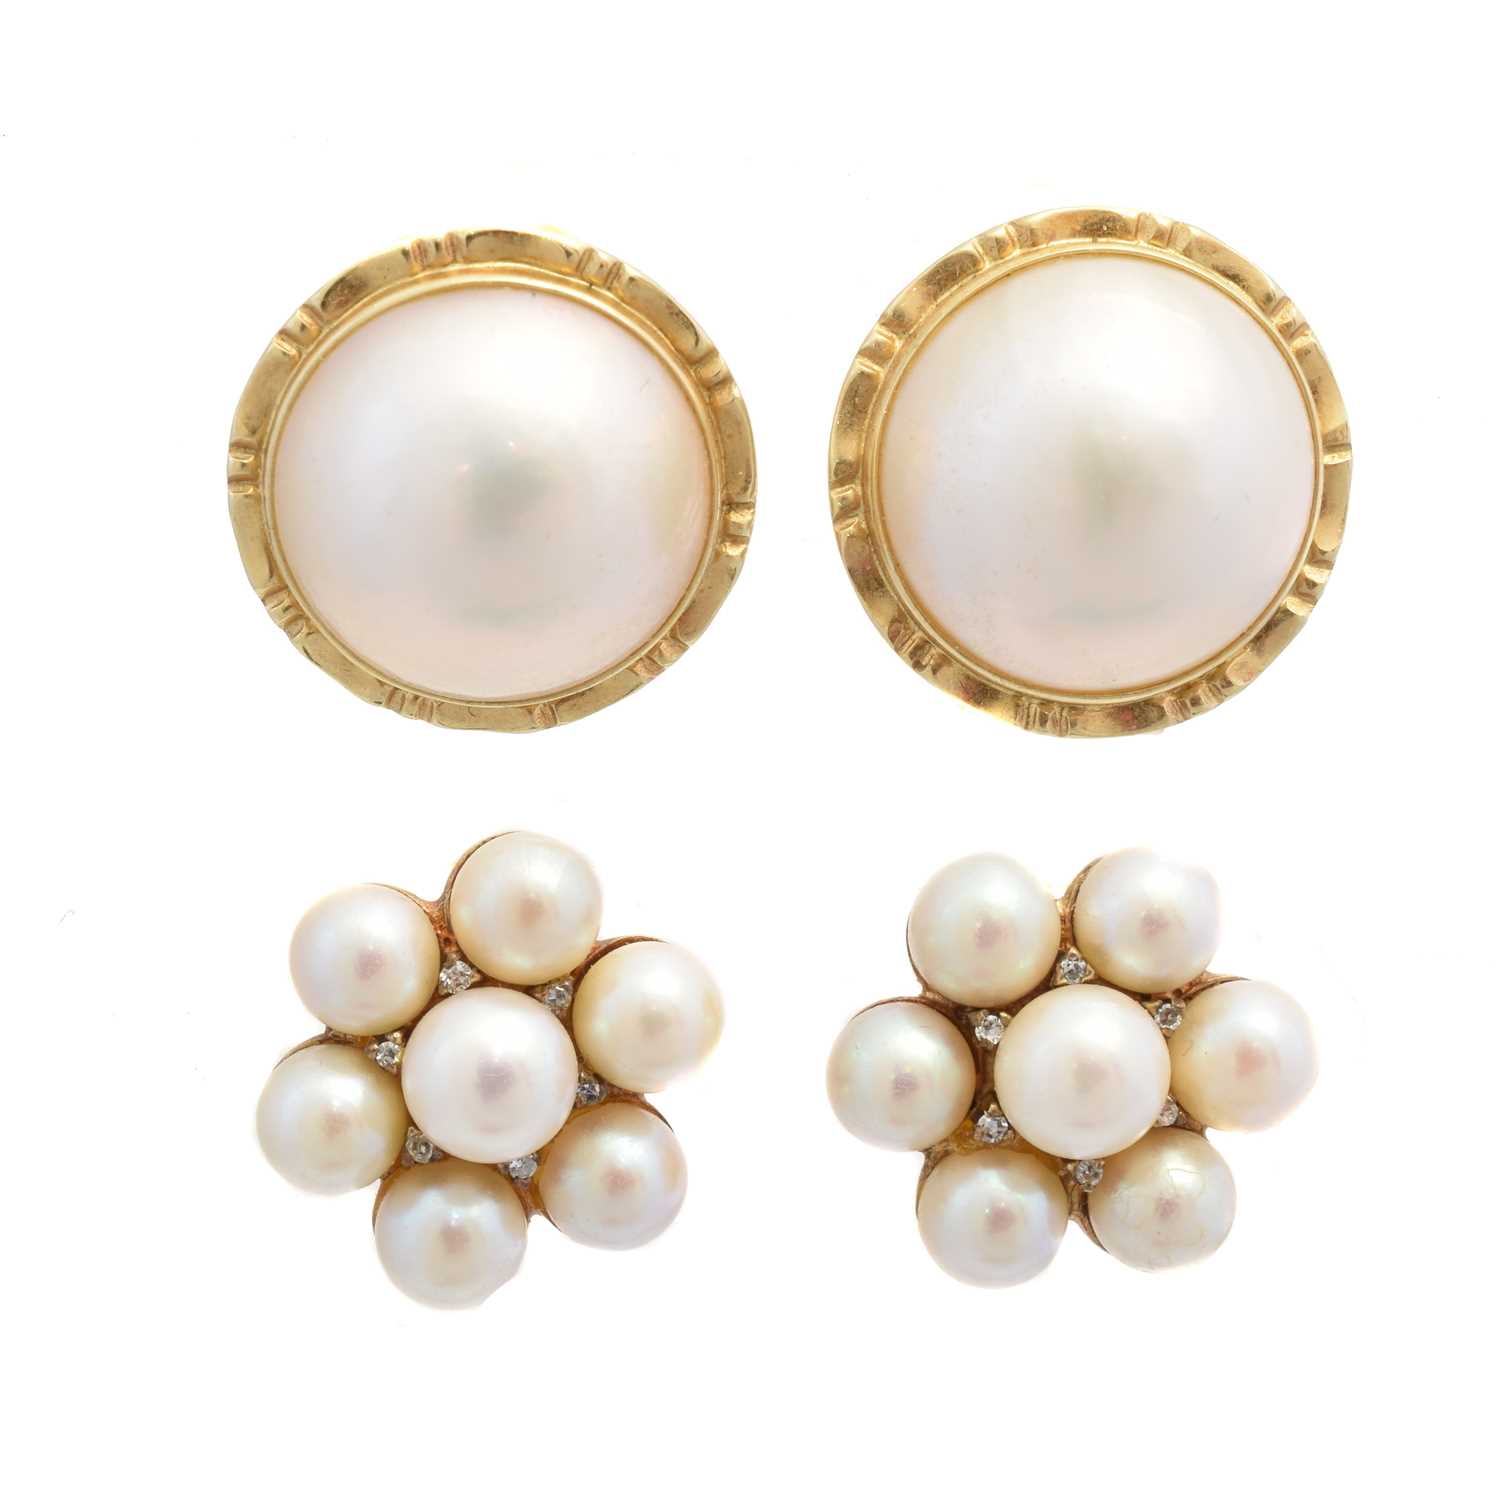 Lot 77 - Two pairs of cultured pearl earrings